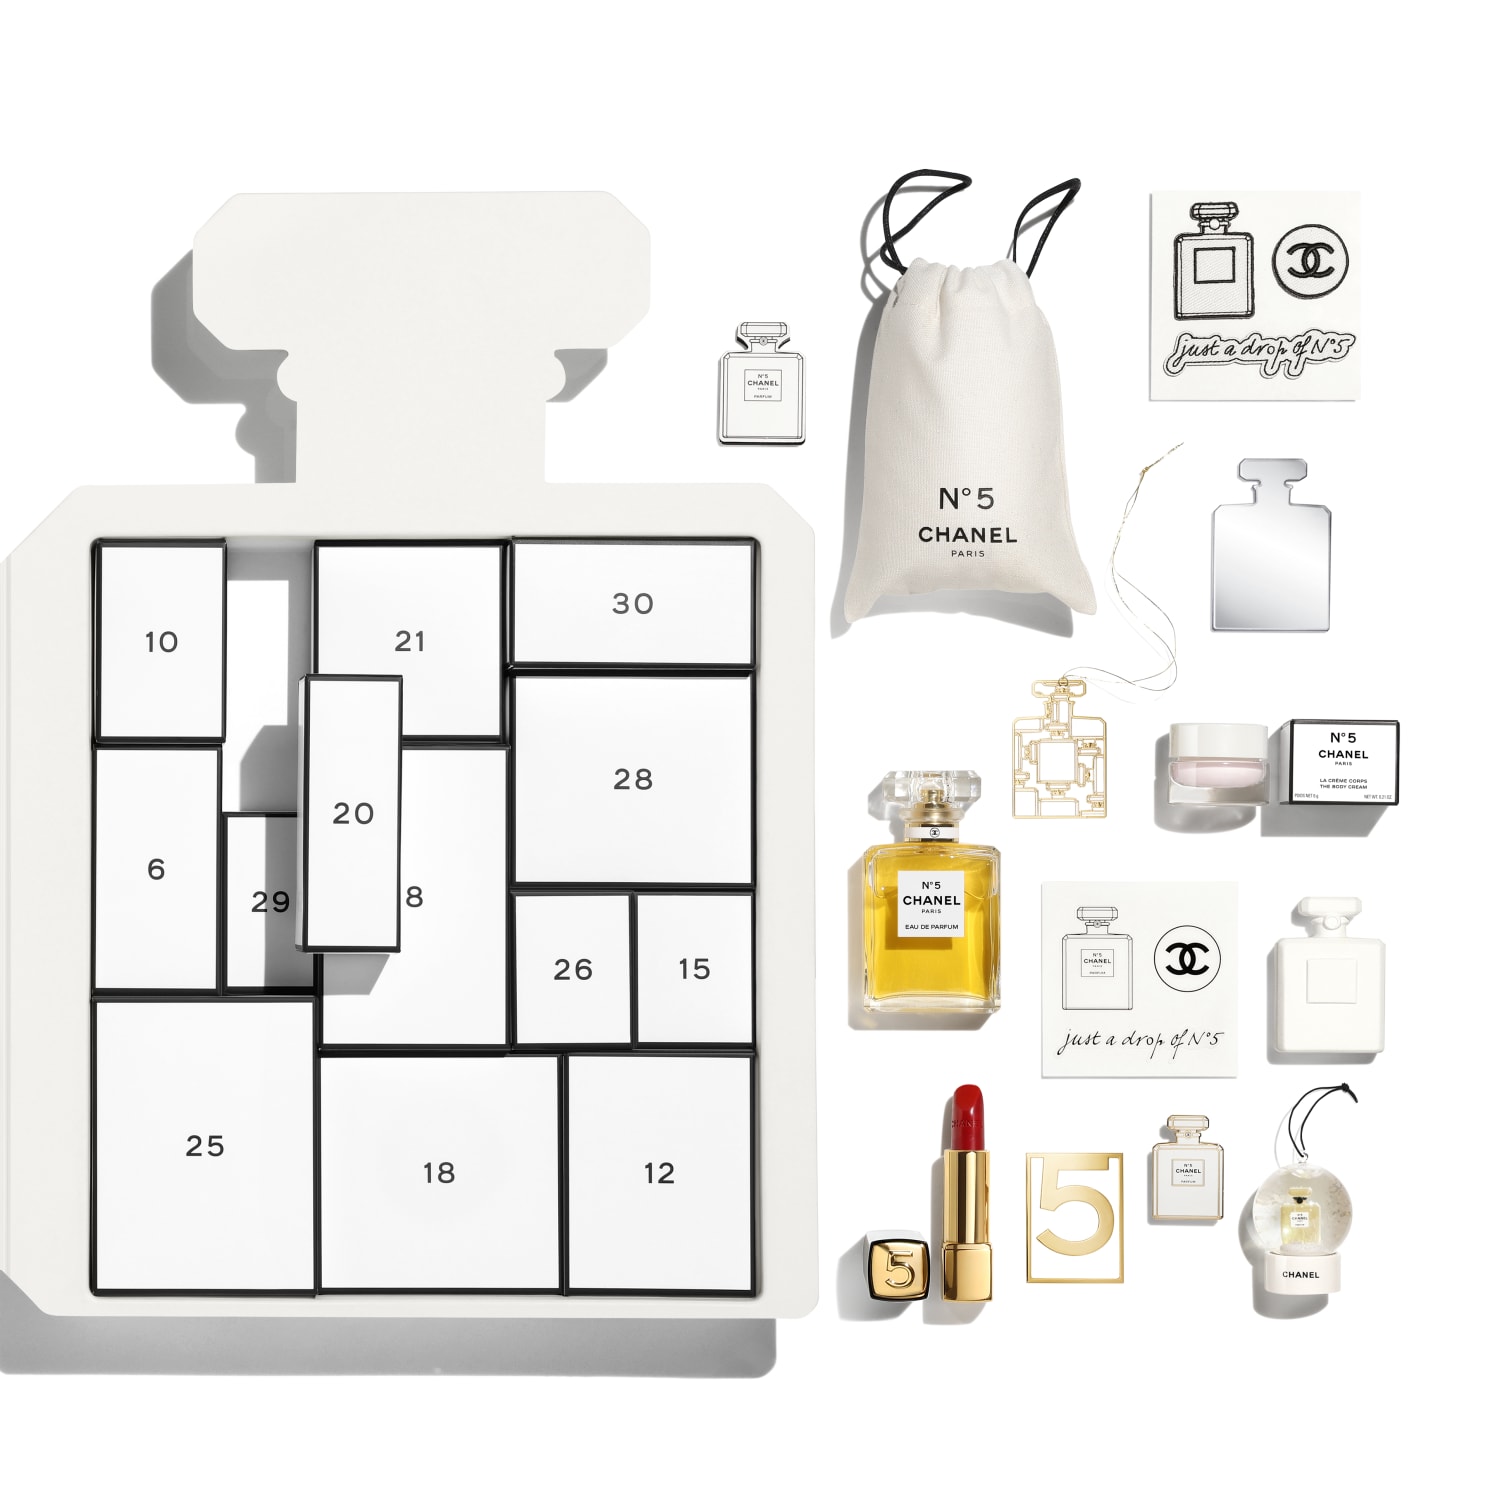 Chanel's S$1,150 advent calendar draws flak for including 'junk' like  stickers, magnets & travel-sized samples  - News from  Singapore, Asia and around the world